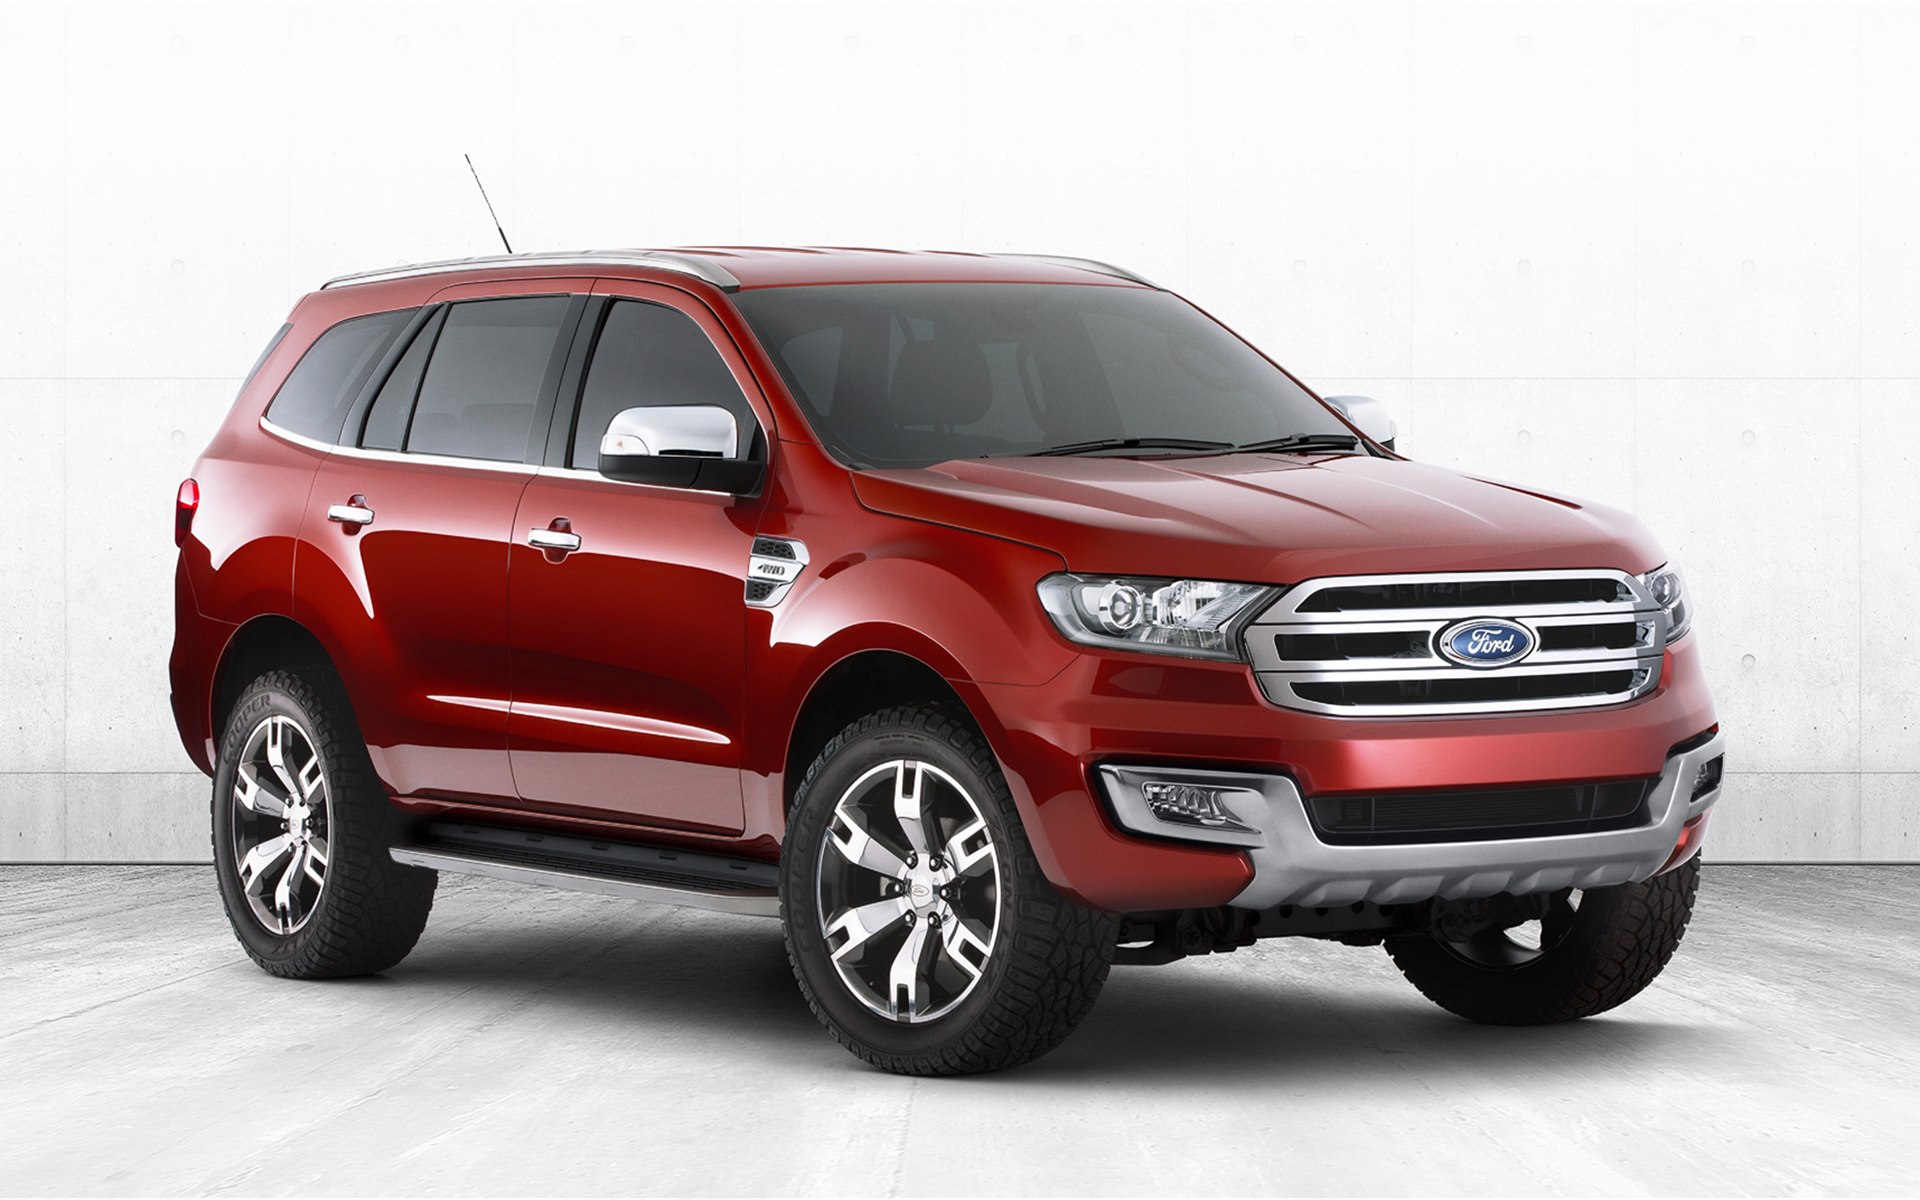 2014 Ford Everest Concept Wallpaper | HD Car Wallpapers | ID #4347